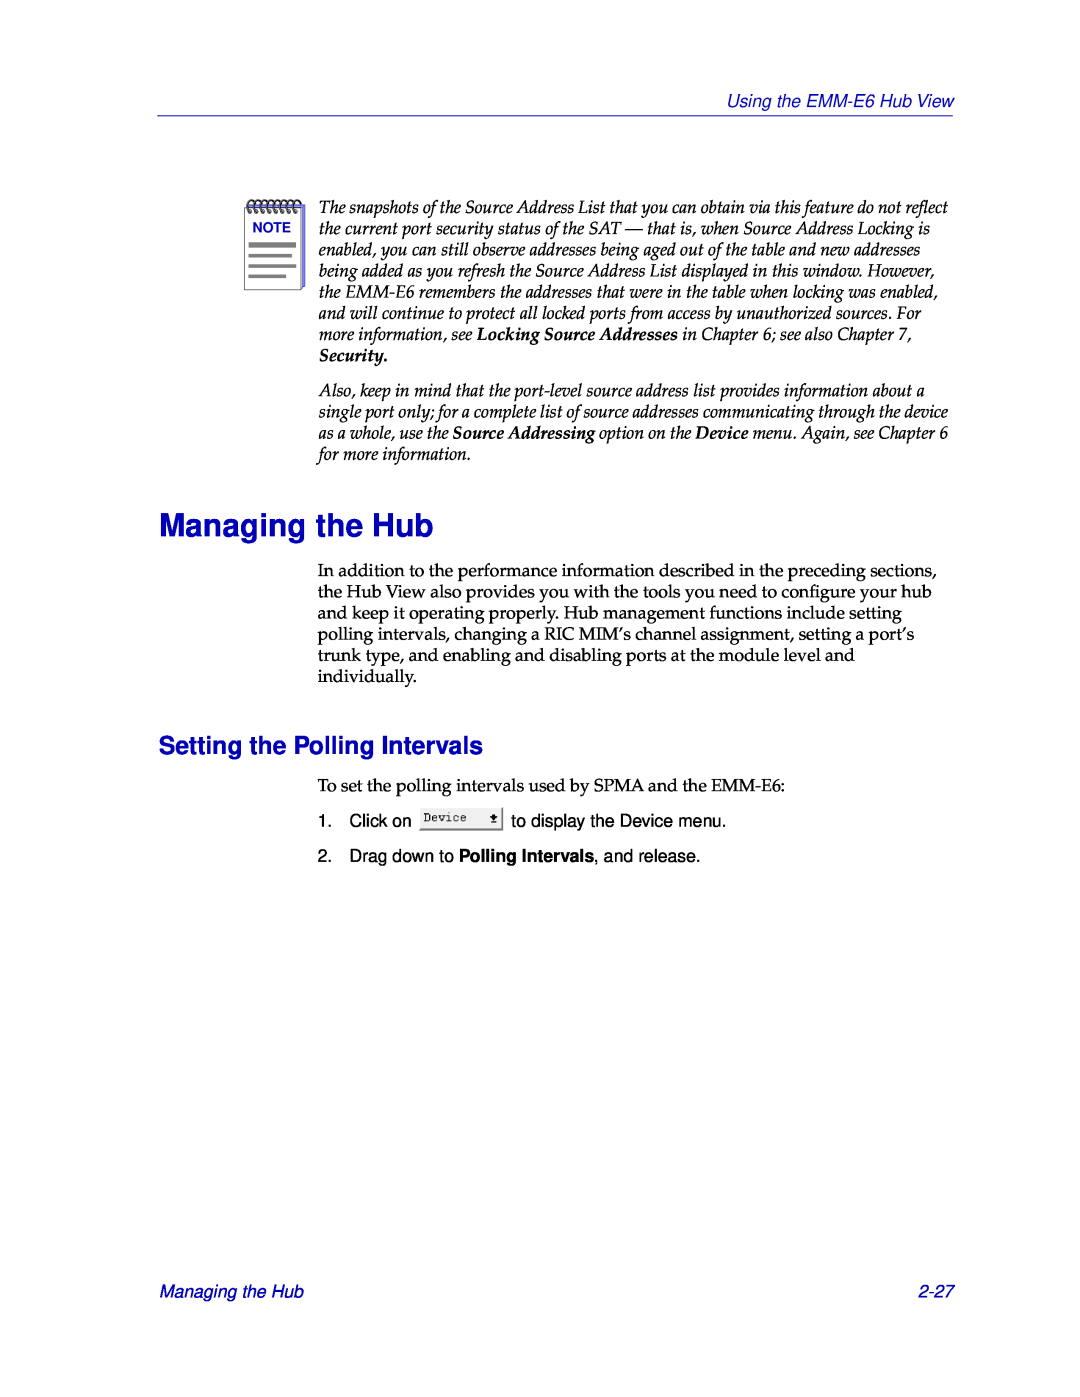 Cabletron Systems manual Managing the Hub, Setting the Polling Intervals, 2-27, Using the EMM-E6 Hub View, Security 